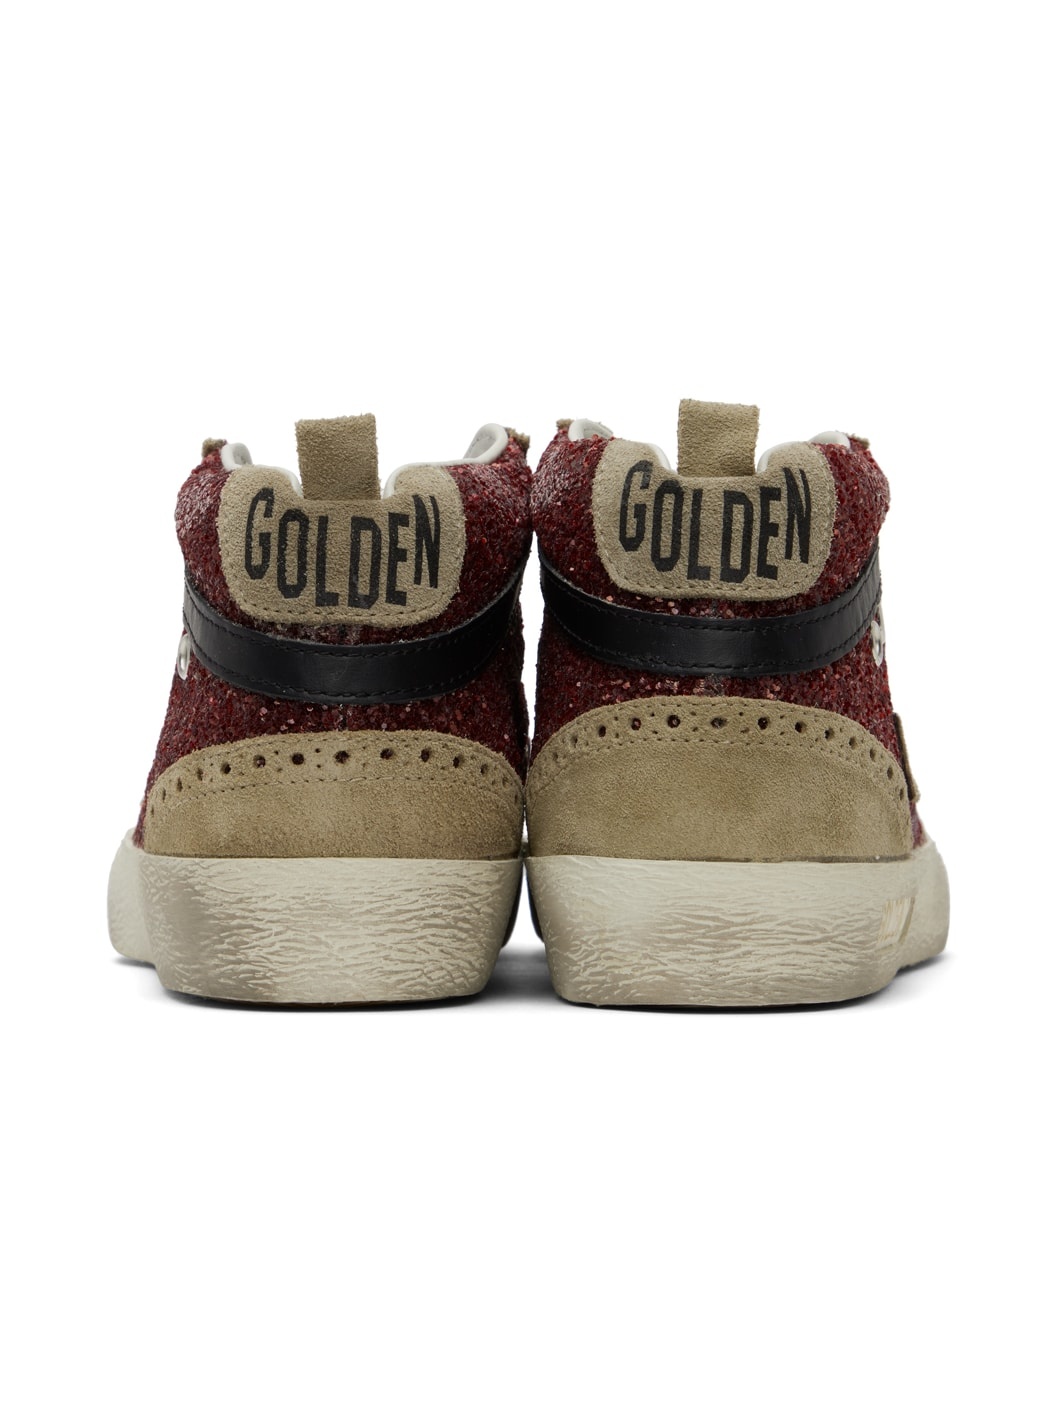 Taupe & Burgundy Mid Star Sneakers - 2